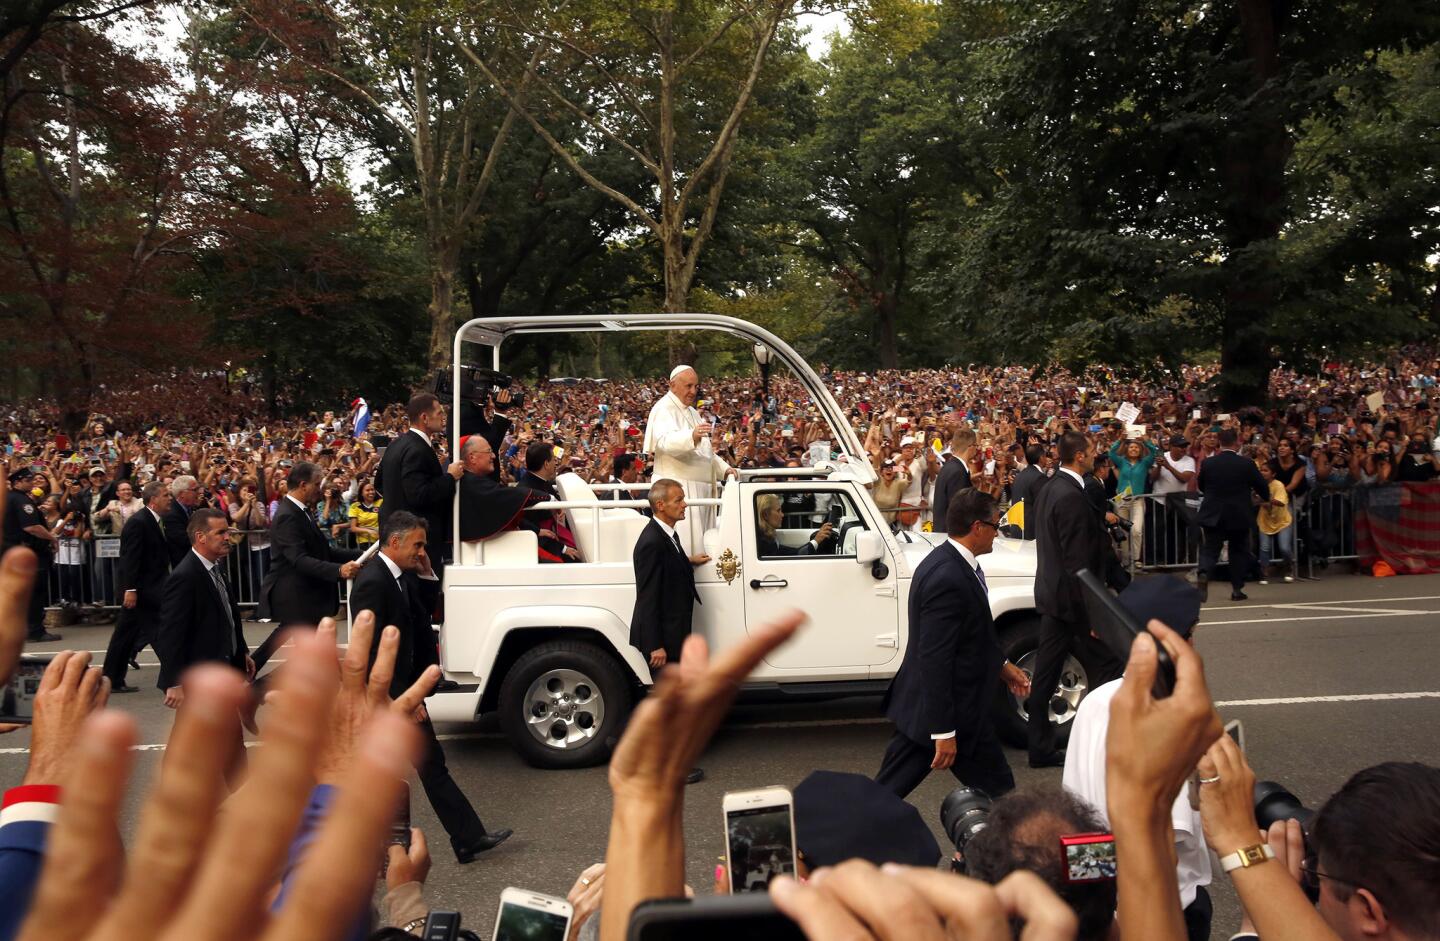 Pope Francis travels through Central Park